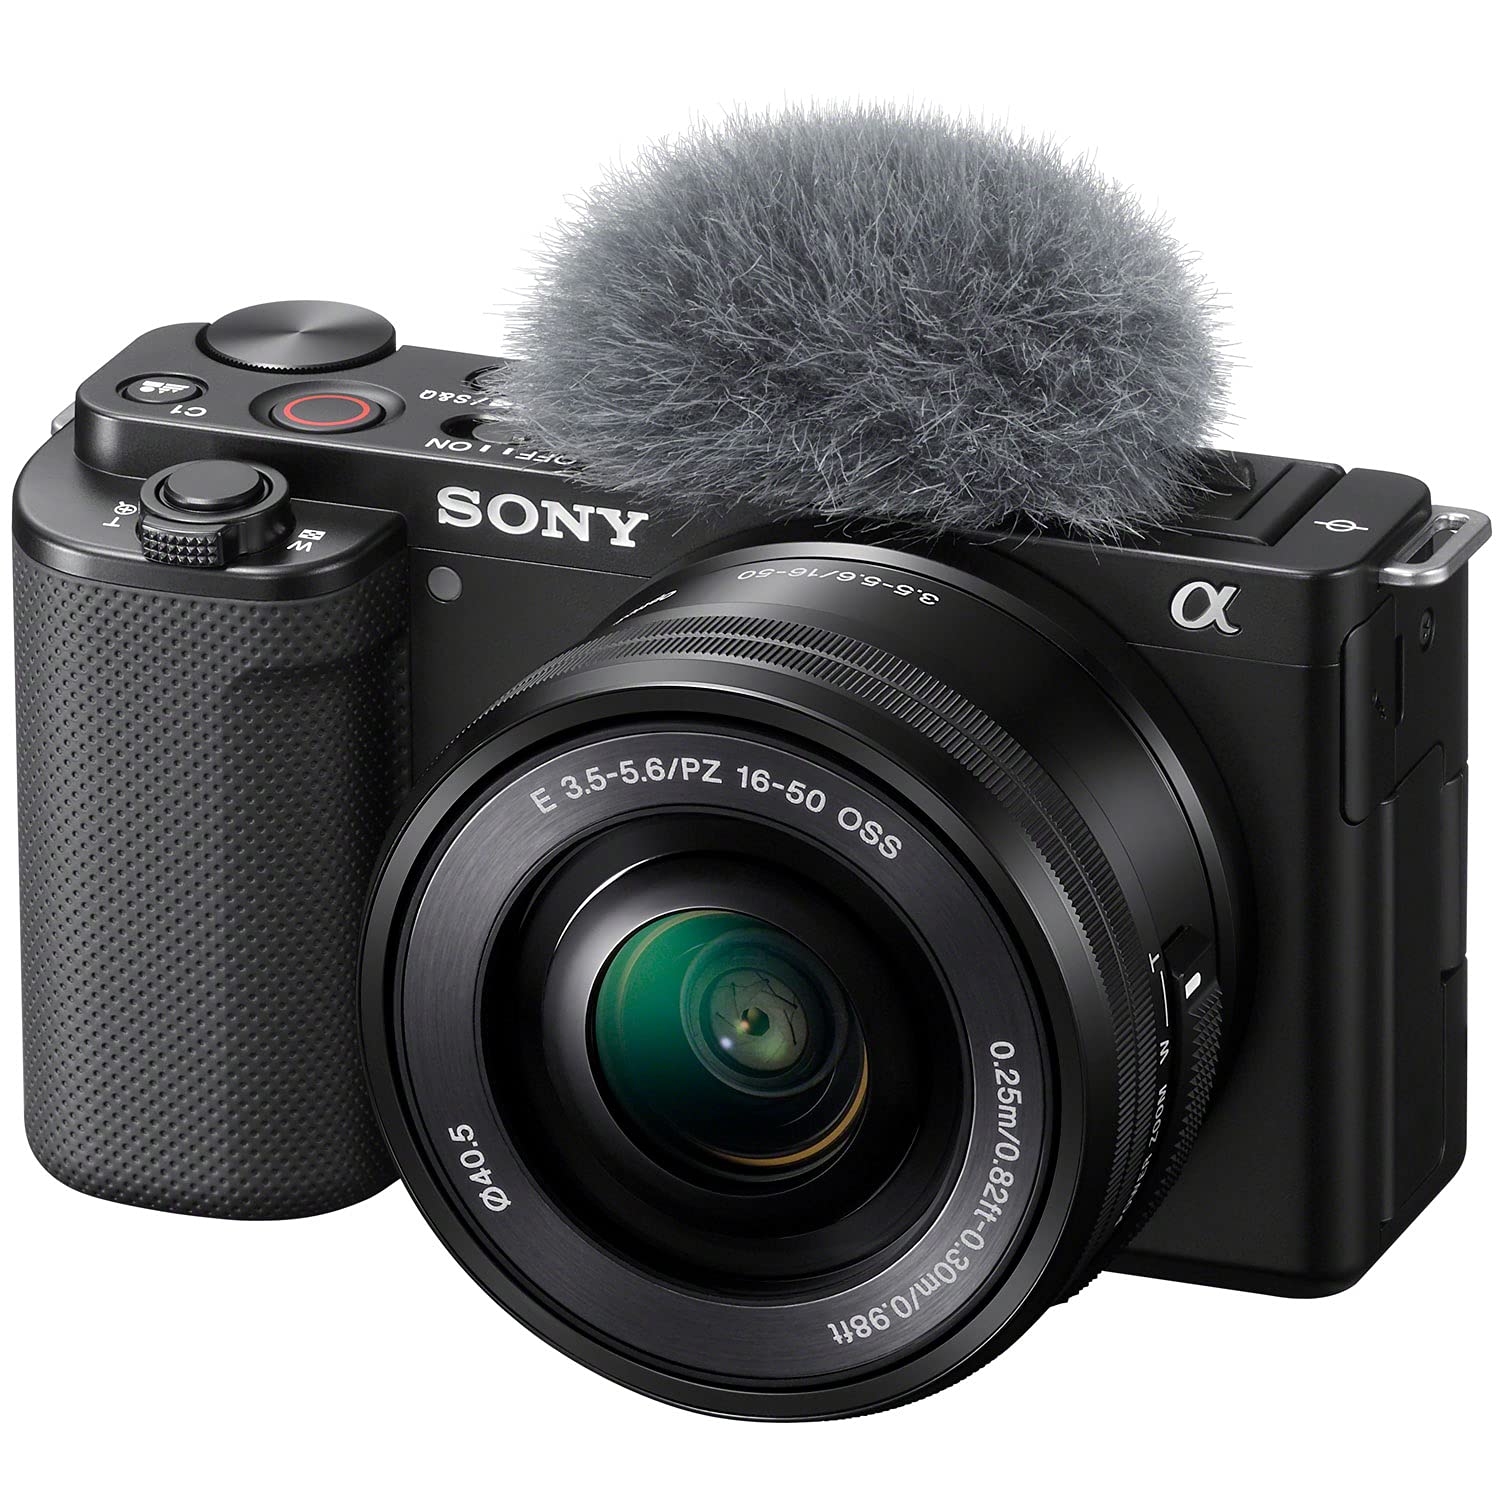 Sony ZV-E10 Mirrorless Camera Vlogger Kit with 16-50mm F3.5-5.6 Lens ILCZV-E10L/B Black Bundle with ACCVC1 Including GP-VPT2BT Grip + Filters + Wide & Telephoto Lenses + Deco Gear Case & Accessories